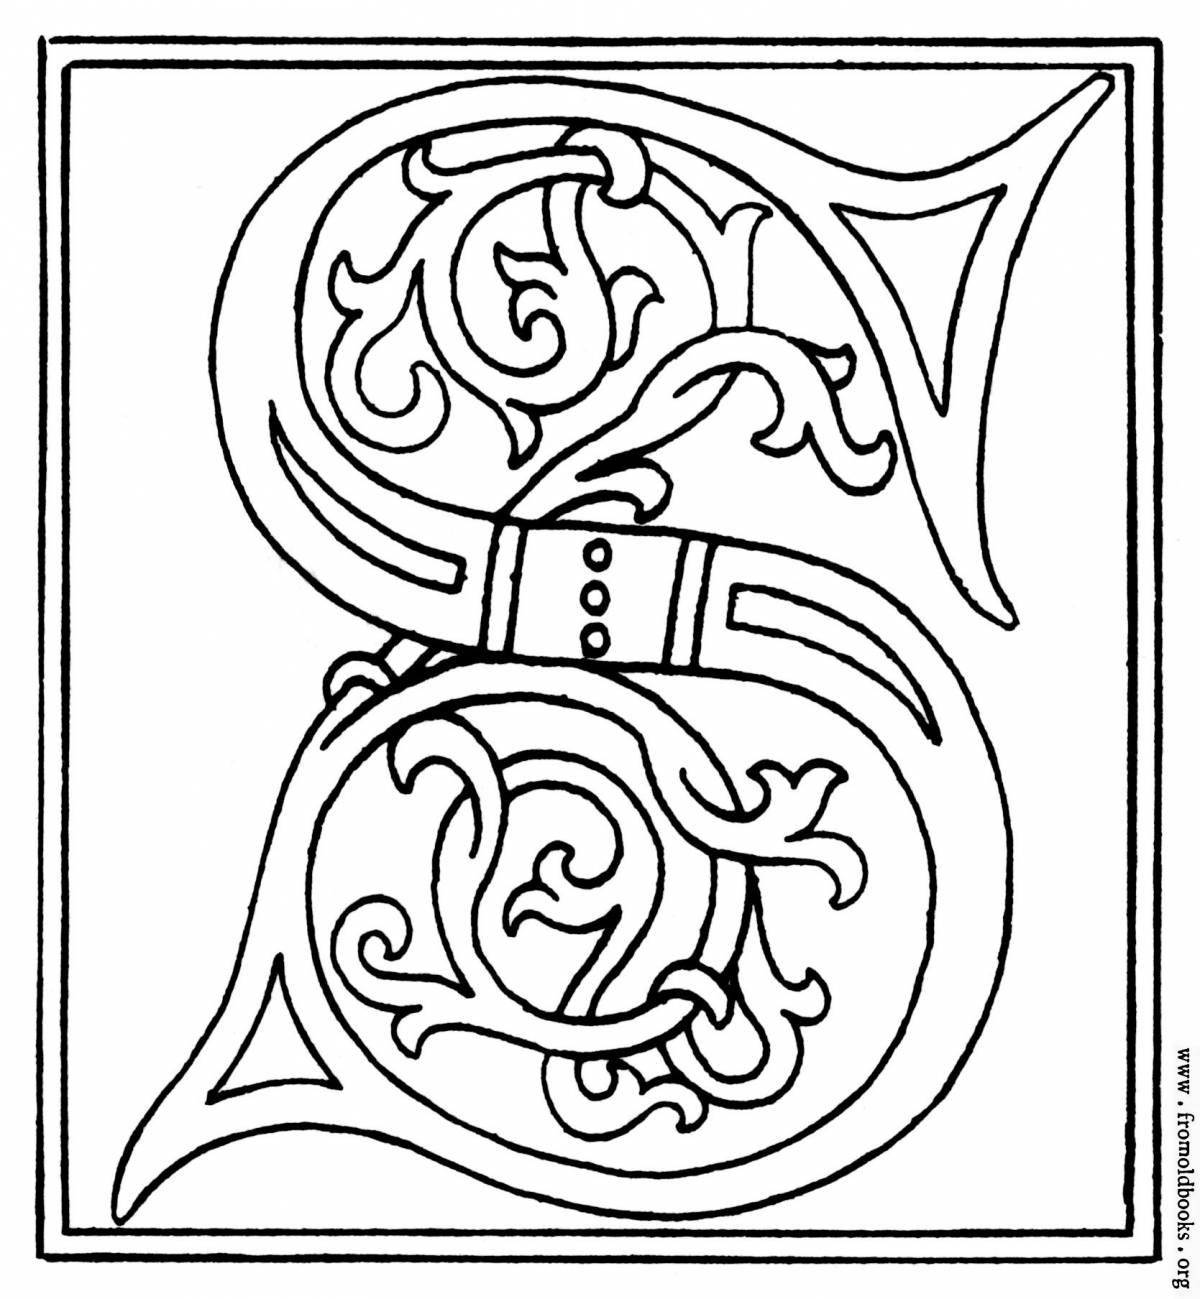 Funny coloring book initial letter slavic